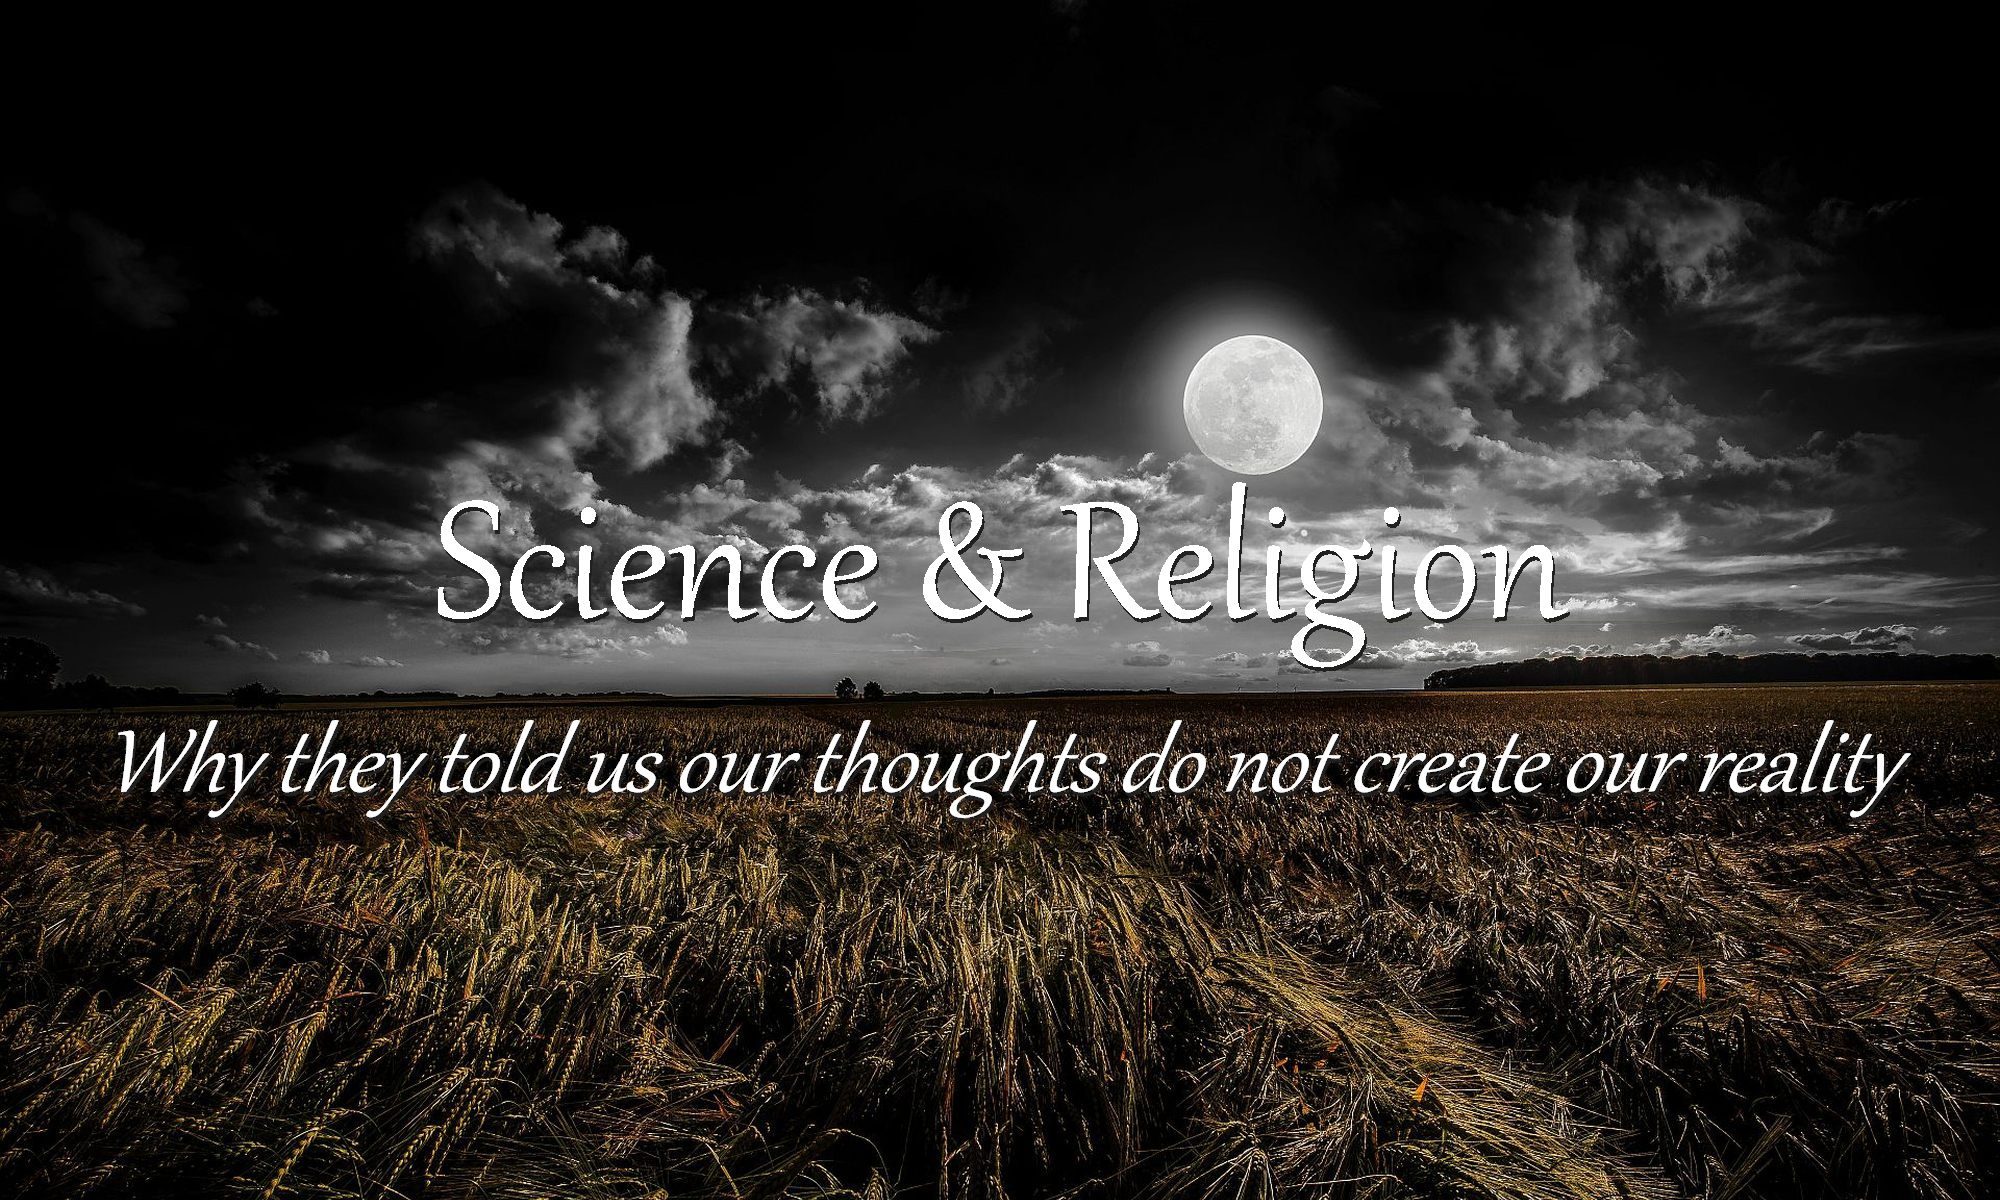 Why Science Religion Told Us Our Thoughts Do Not Create Our Physical Reality